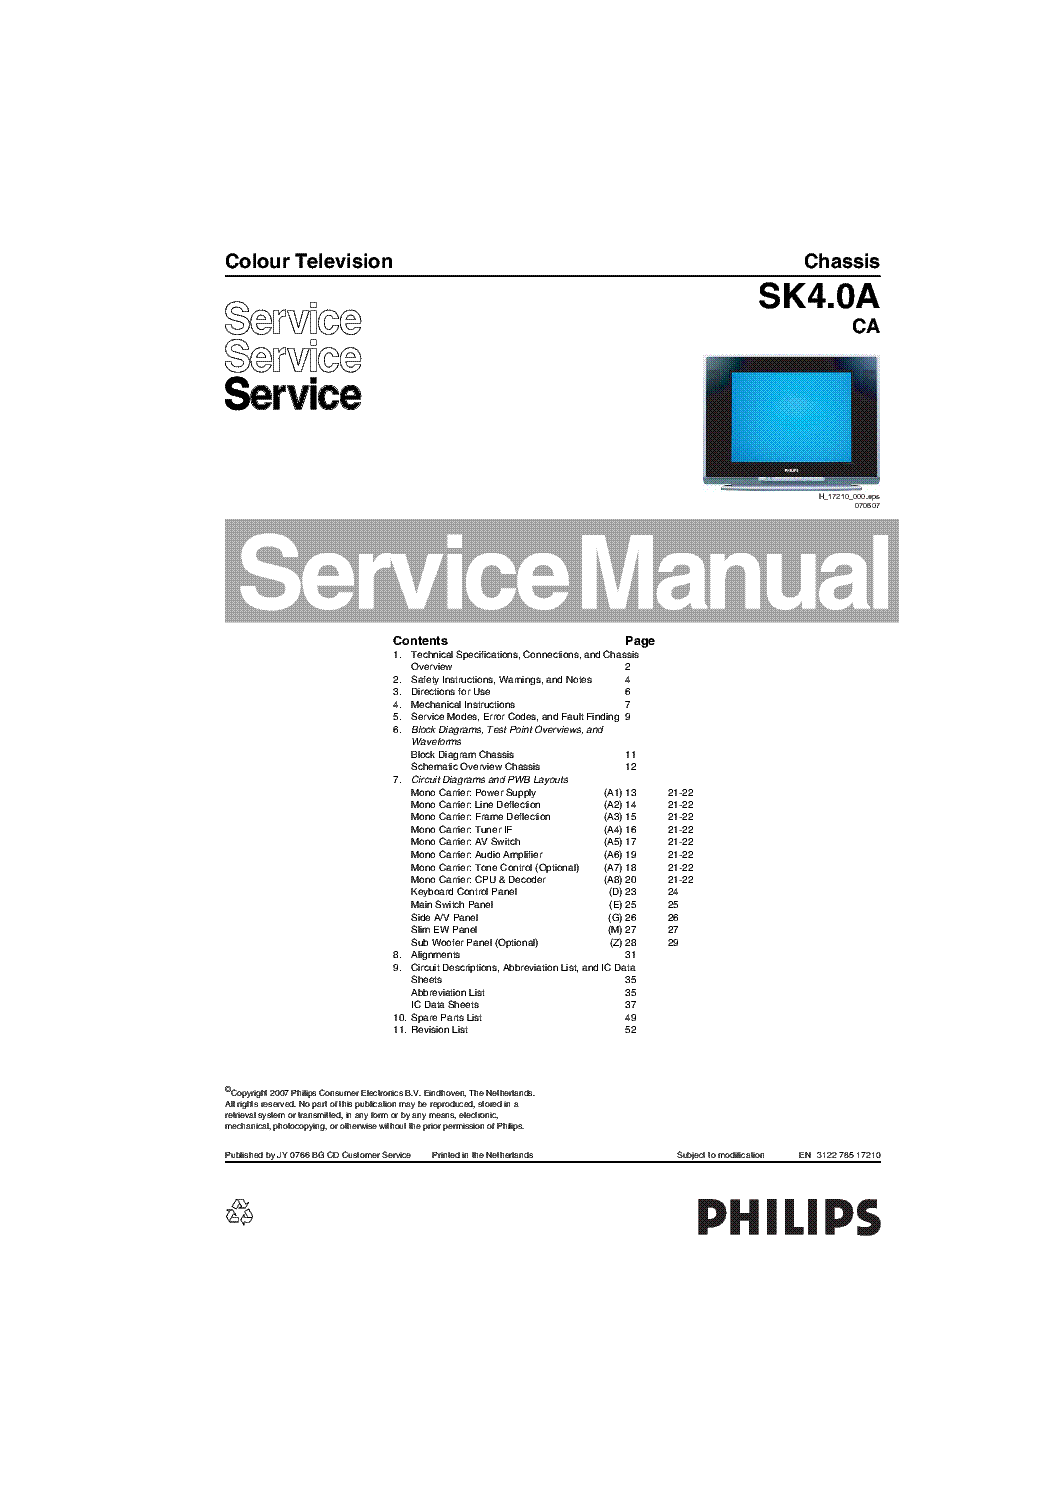 PHILIPS CHASSIS SK4.0A CA service manual (1st page)